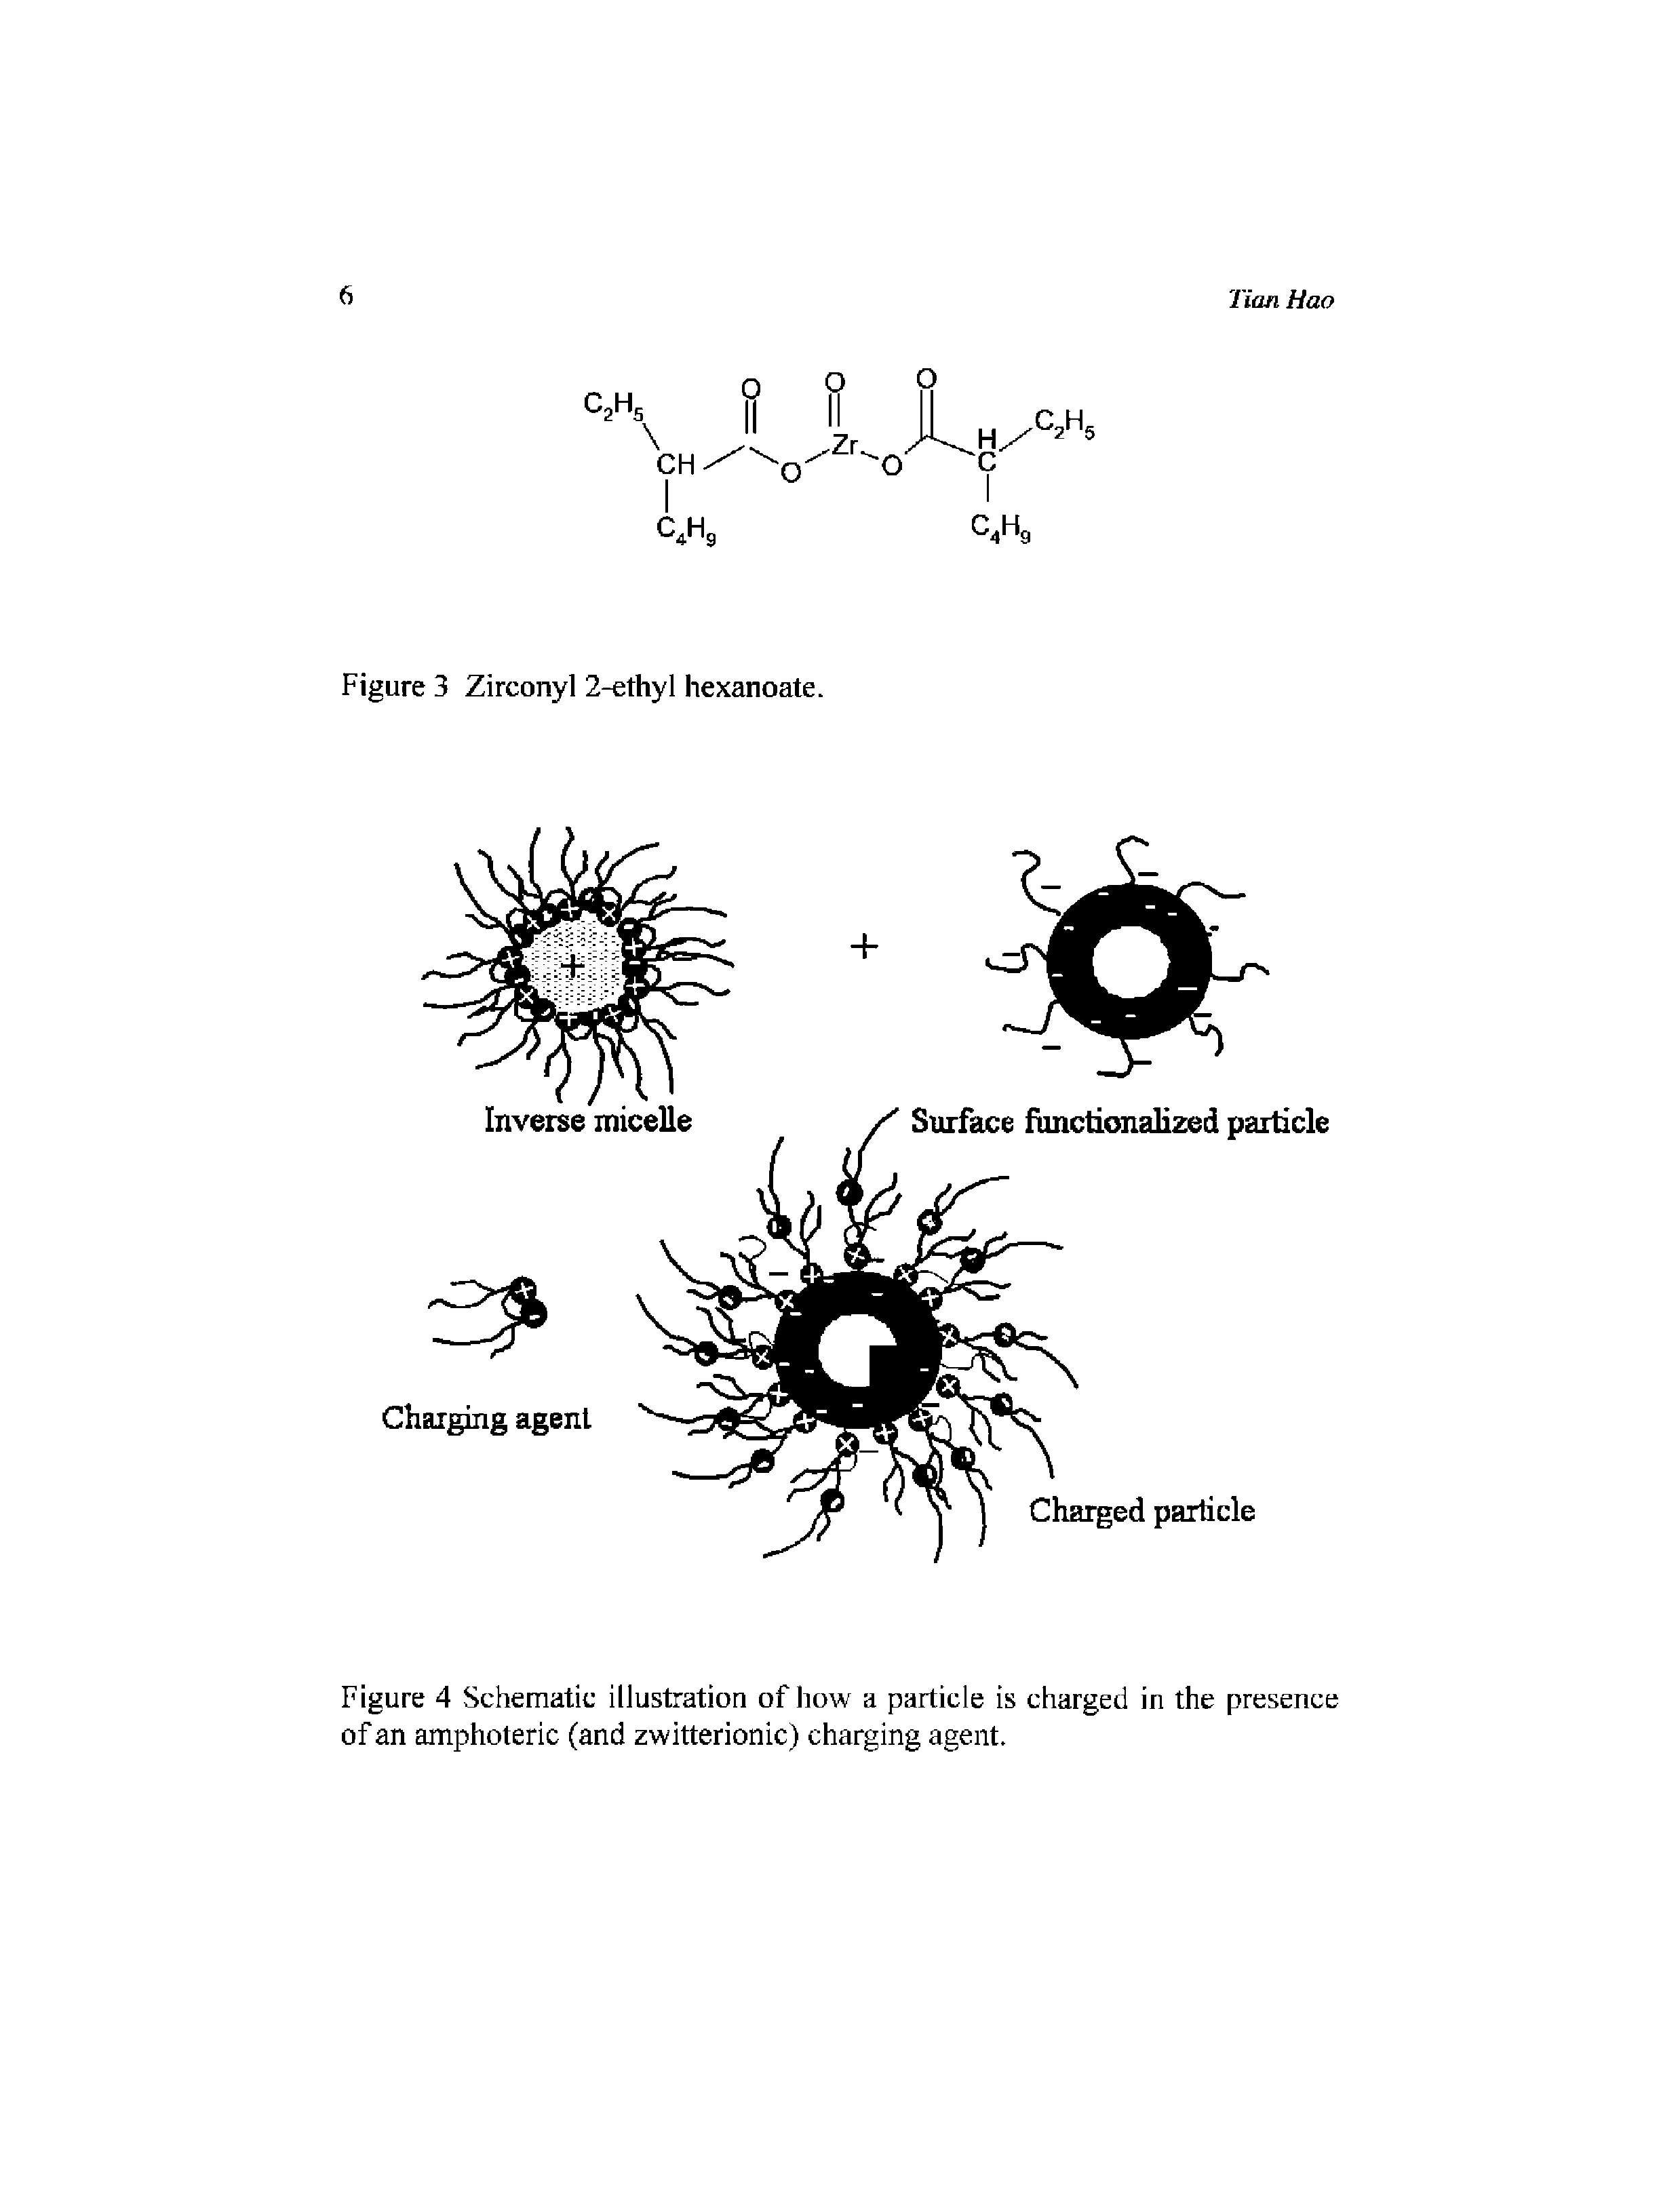 Figure 4 Schematic illustration of how a particle is charged in the presence of an amphoteric (and zwitterionic) charging agent.